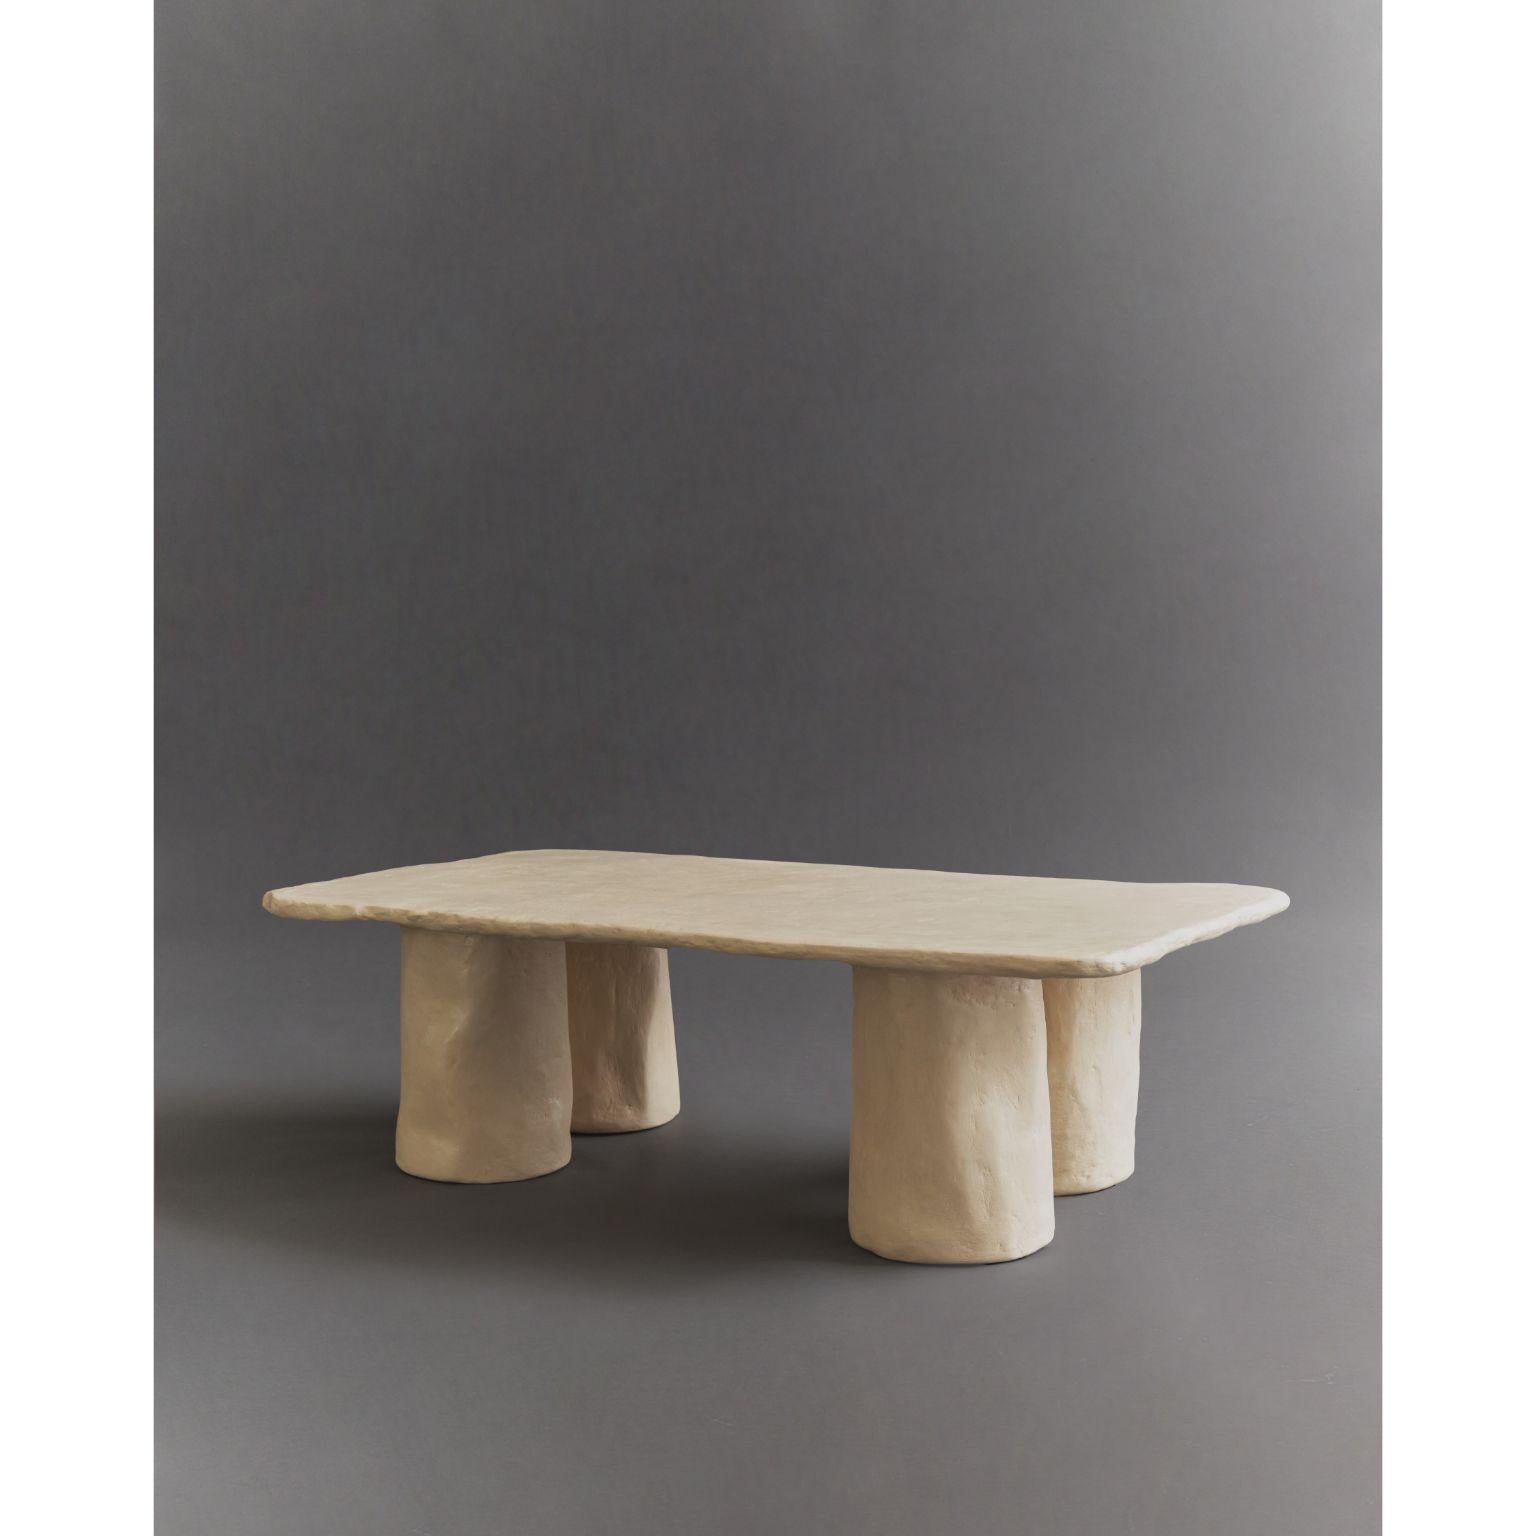 Sand coffee table by Ombia
Dimensions: W 122 x D 71.5 x H 38 cm
Materials: Mix media, sand limewash finish. 
Custom sizes and finishes upon request.


Ombia is a ceramic sculpture and design studio based in Los Angeles. The name and its roots